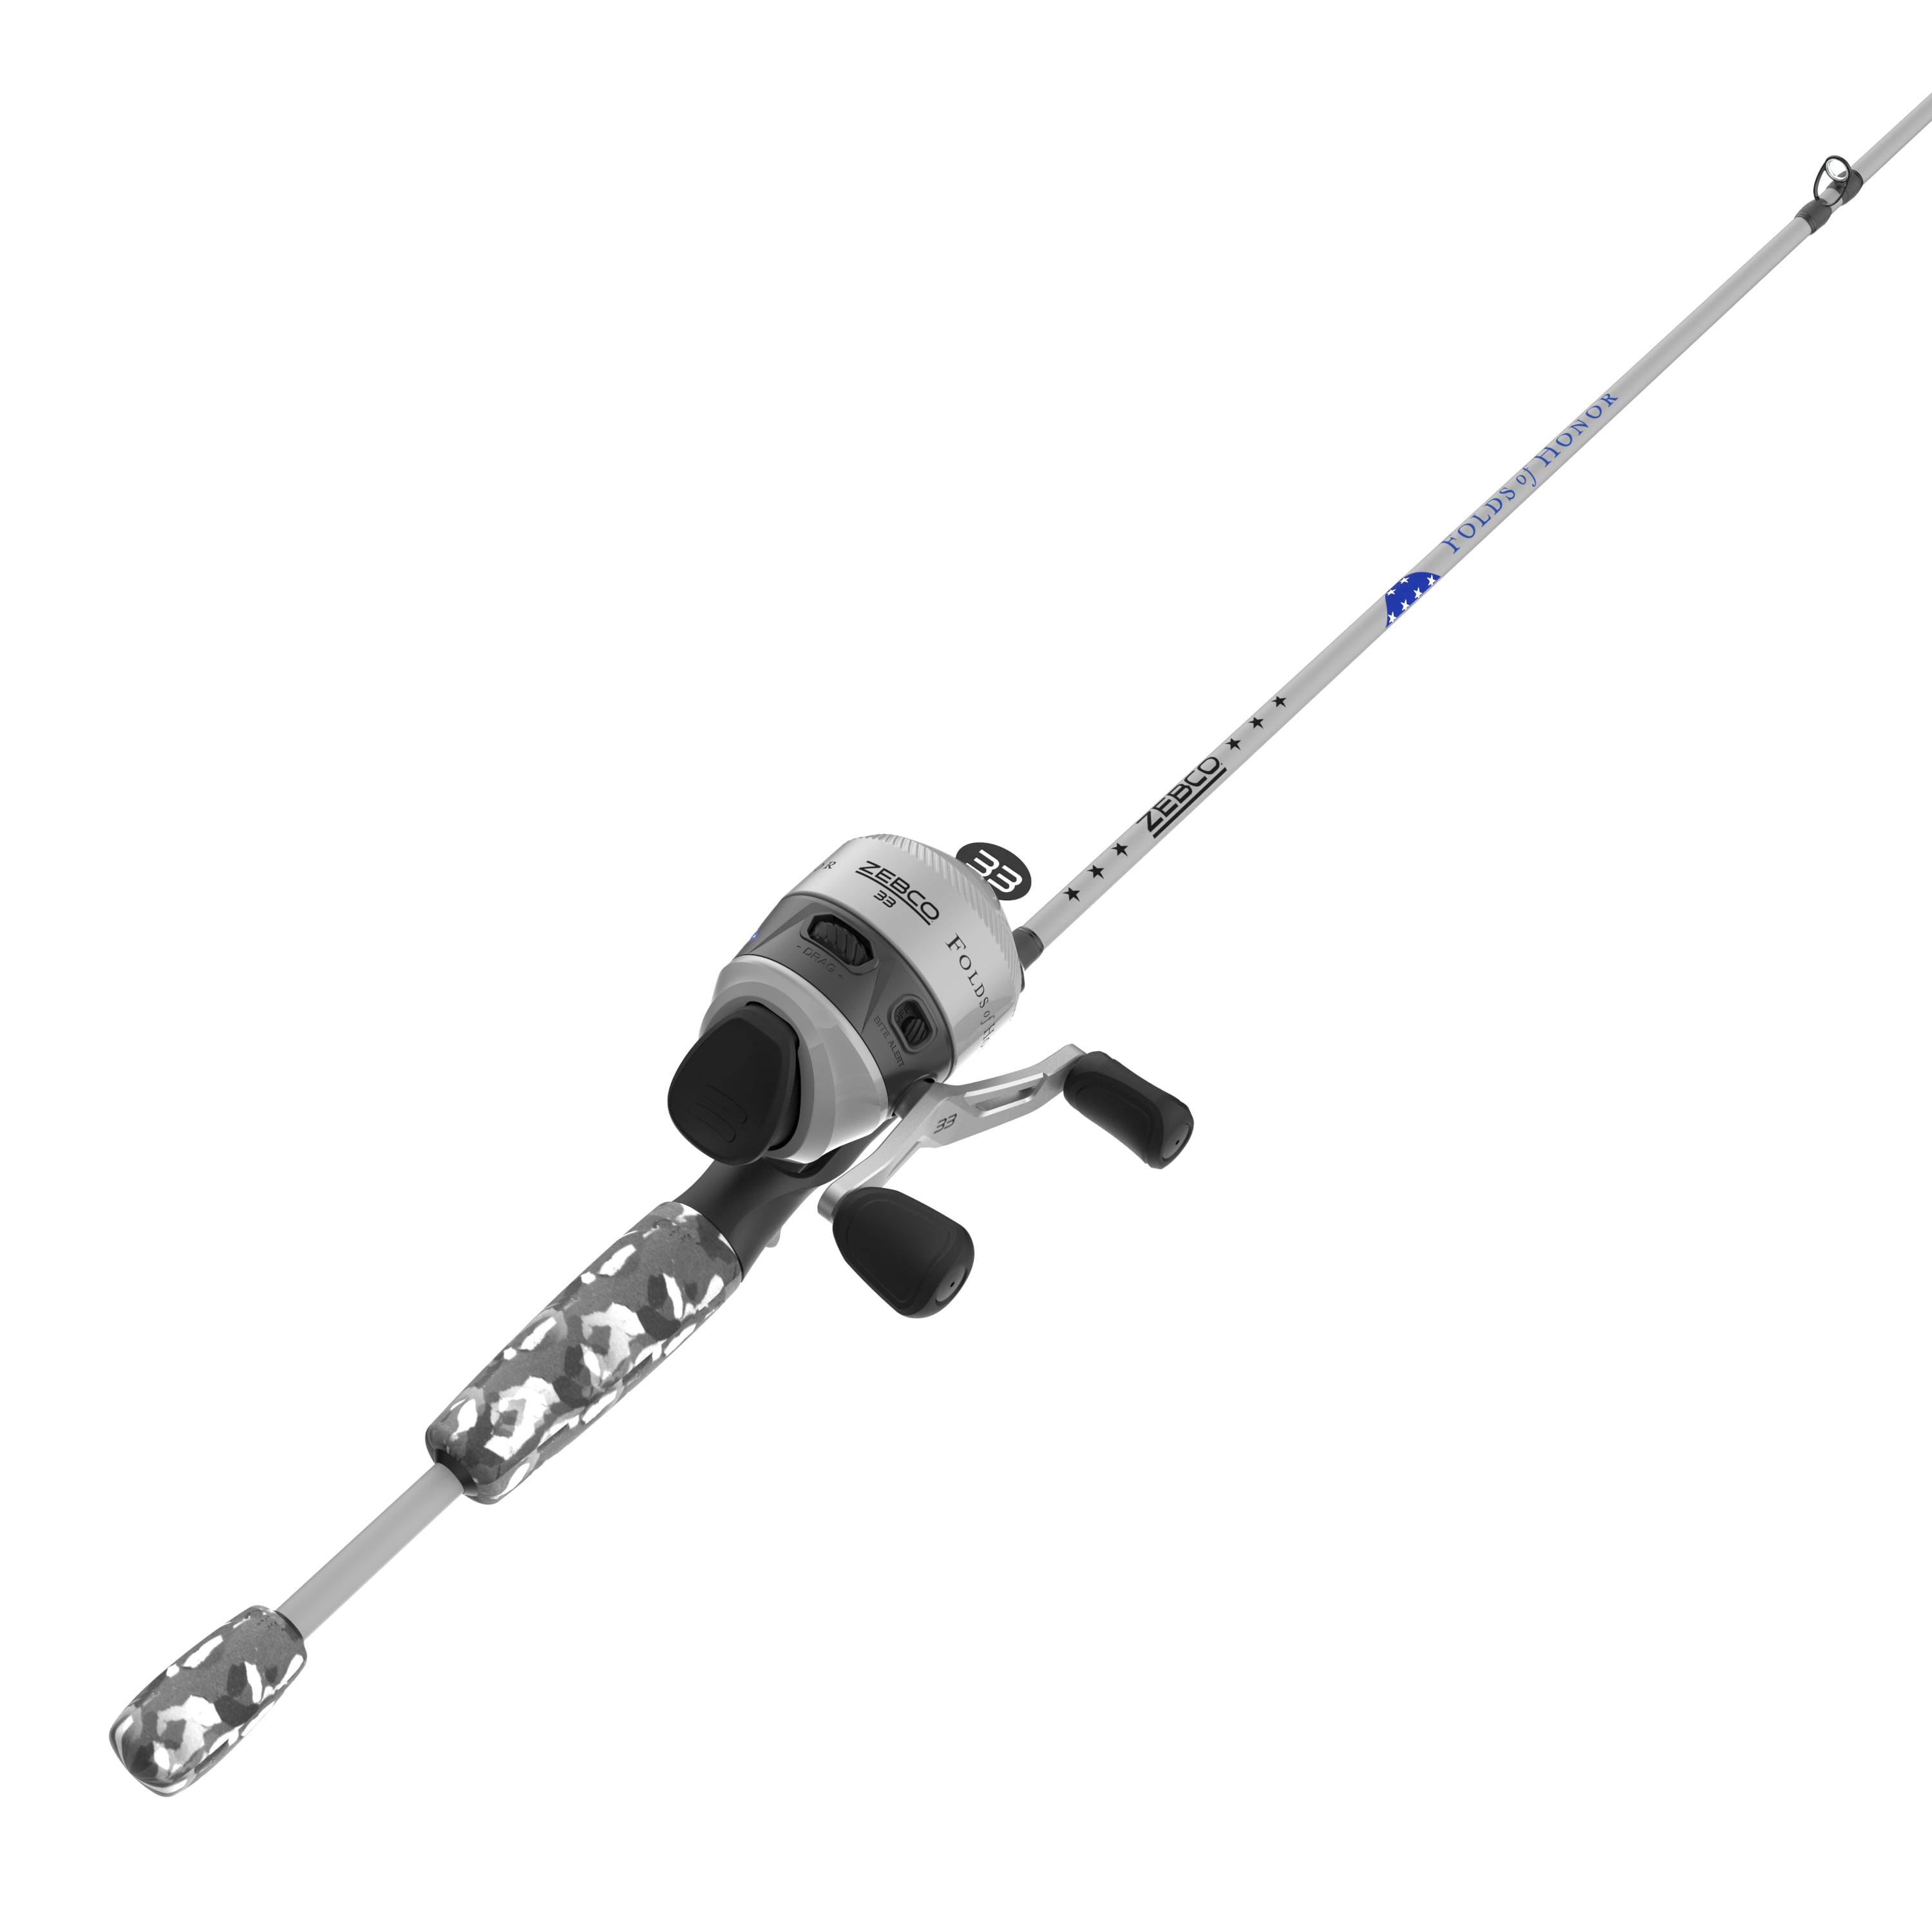 Zebco Splash Spinning Reel and Fishing Rod Combo, Green